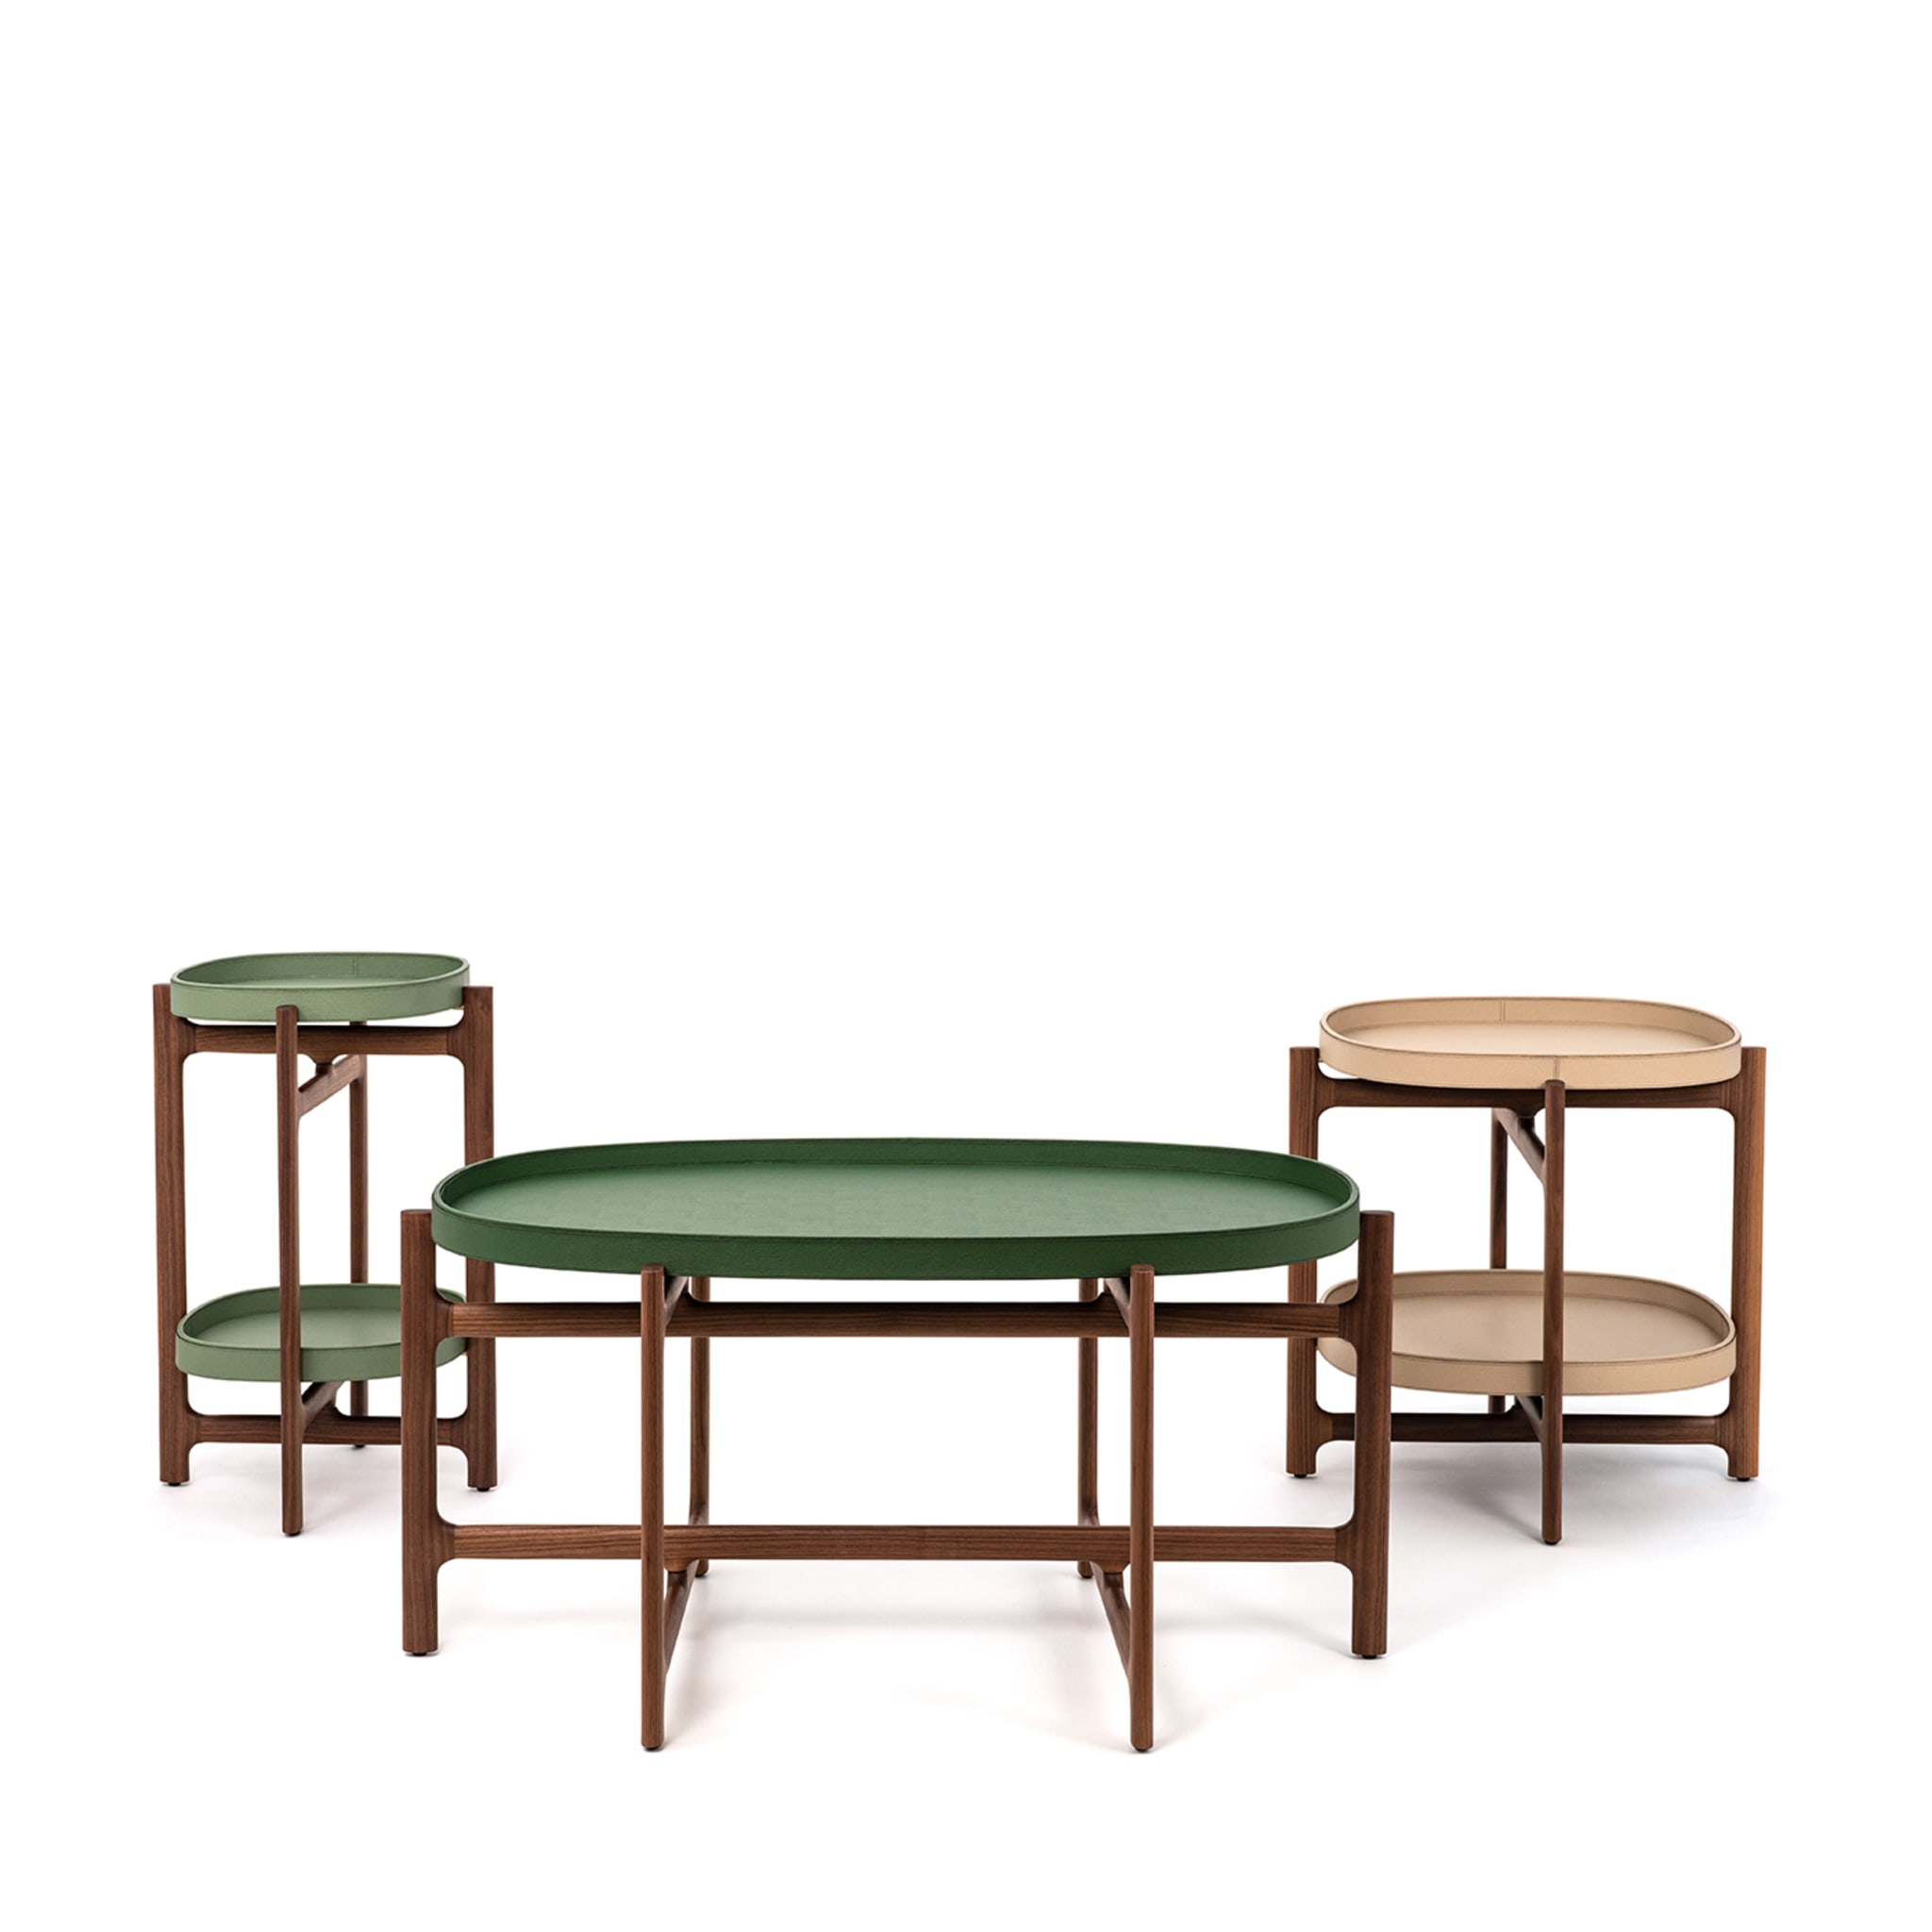 Chelsea Large Green Folding Table - Alternative view 4